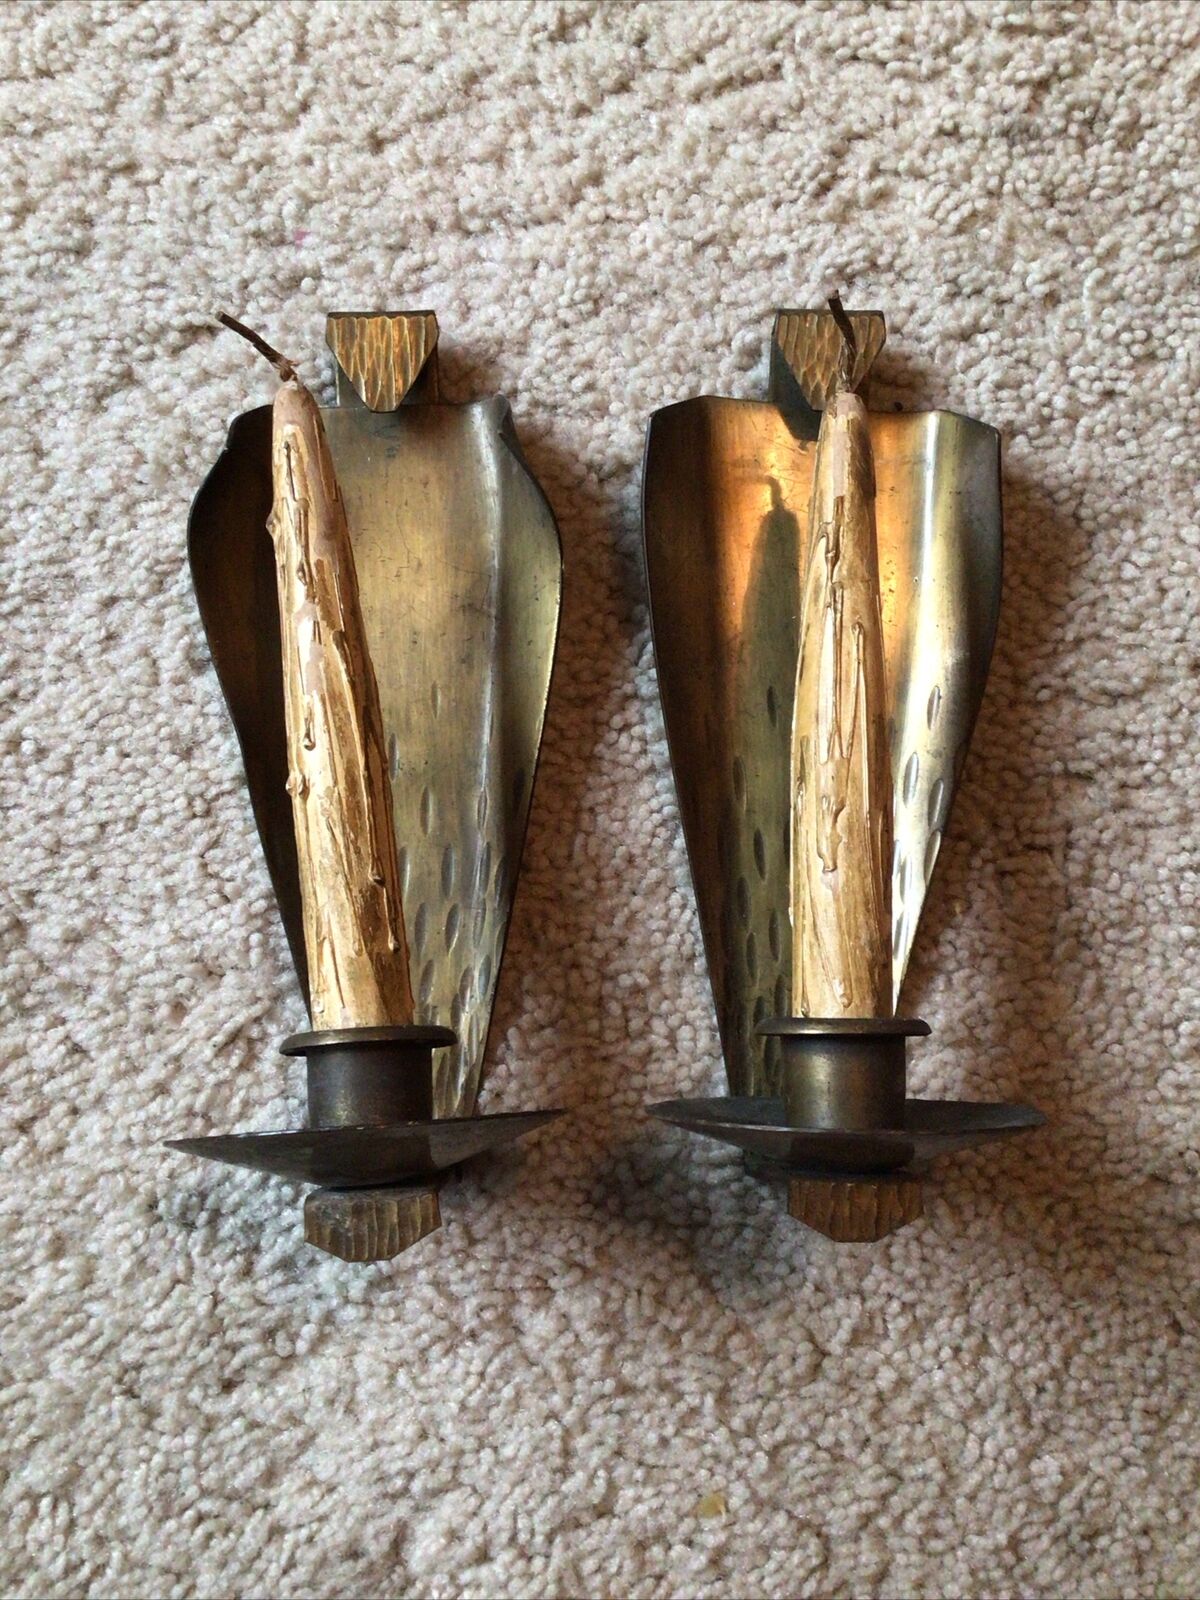 2 Roycroft Arts & Crafts Hammered Brass Candle Wall Sconces, with Wooden Candles